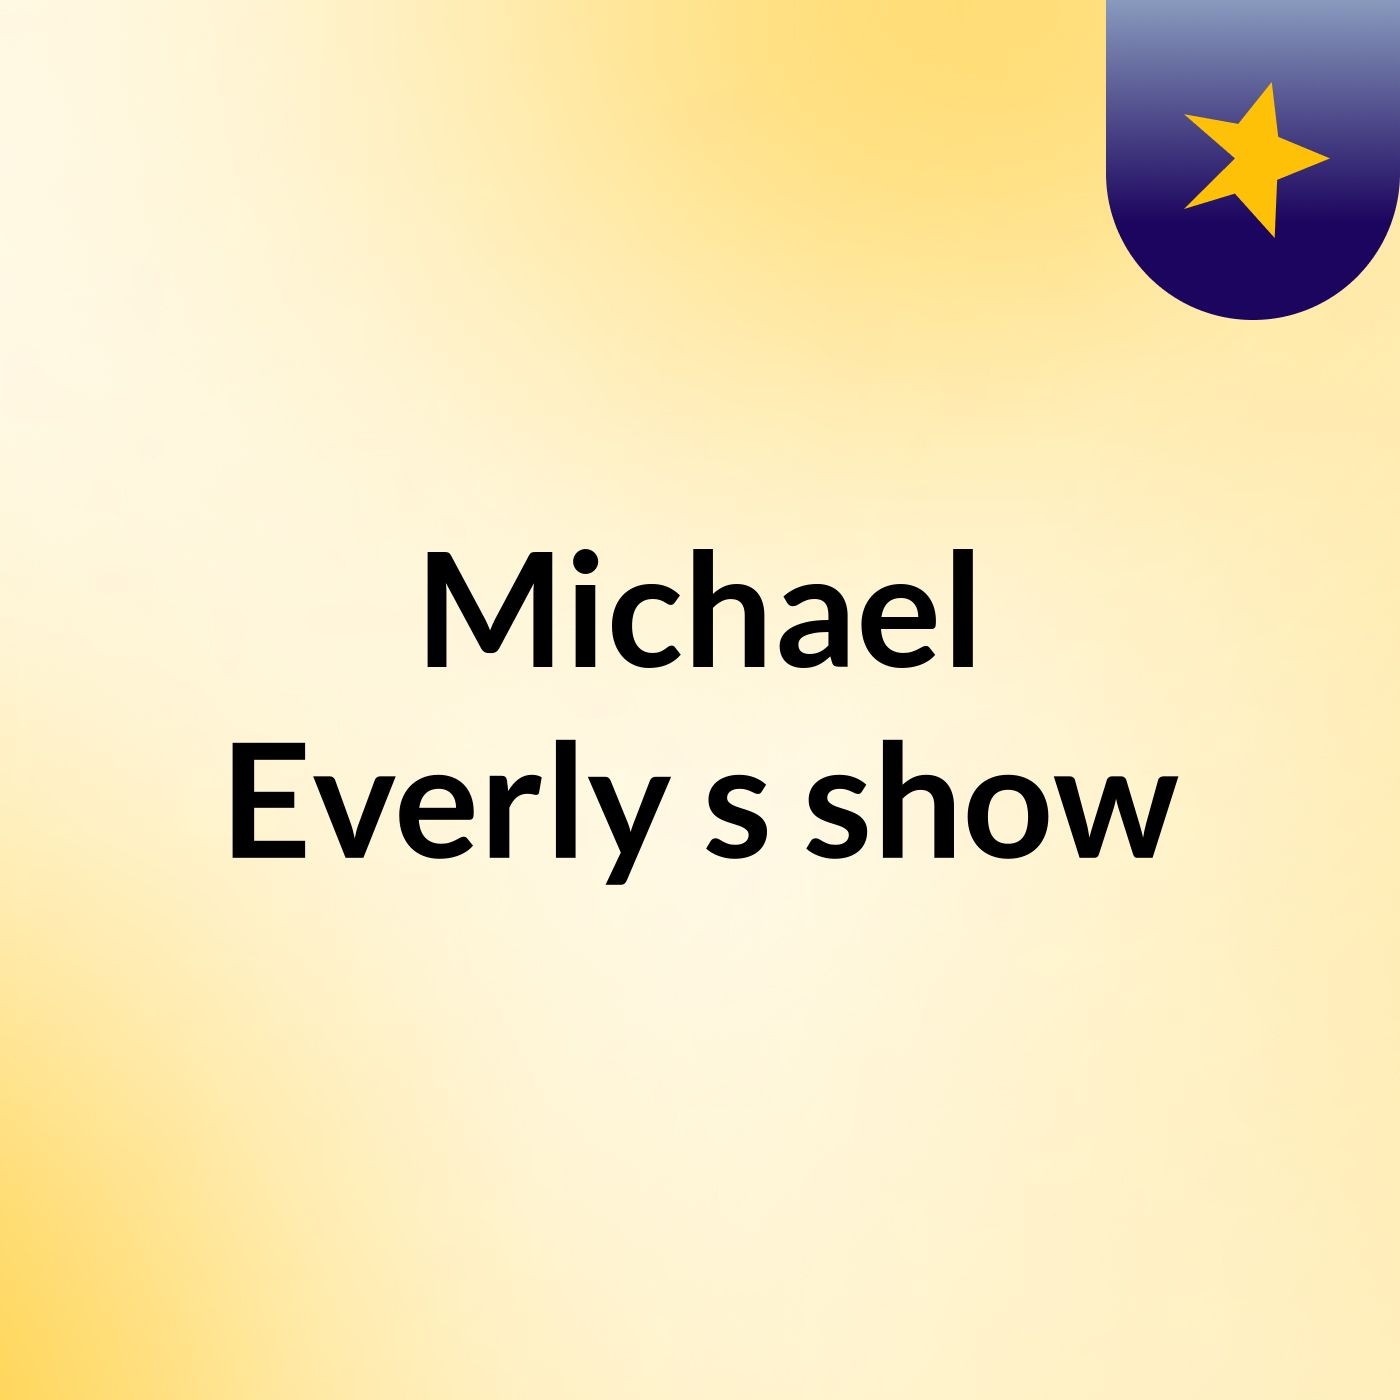 Michael Everly's show